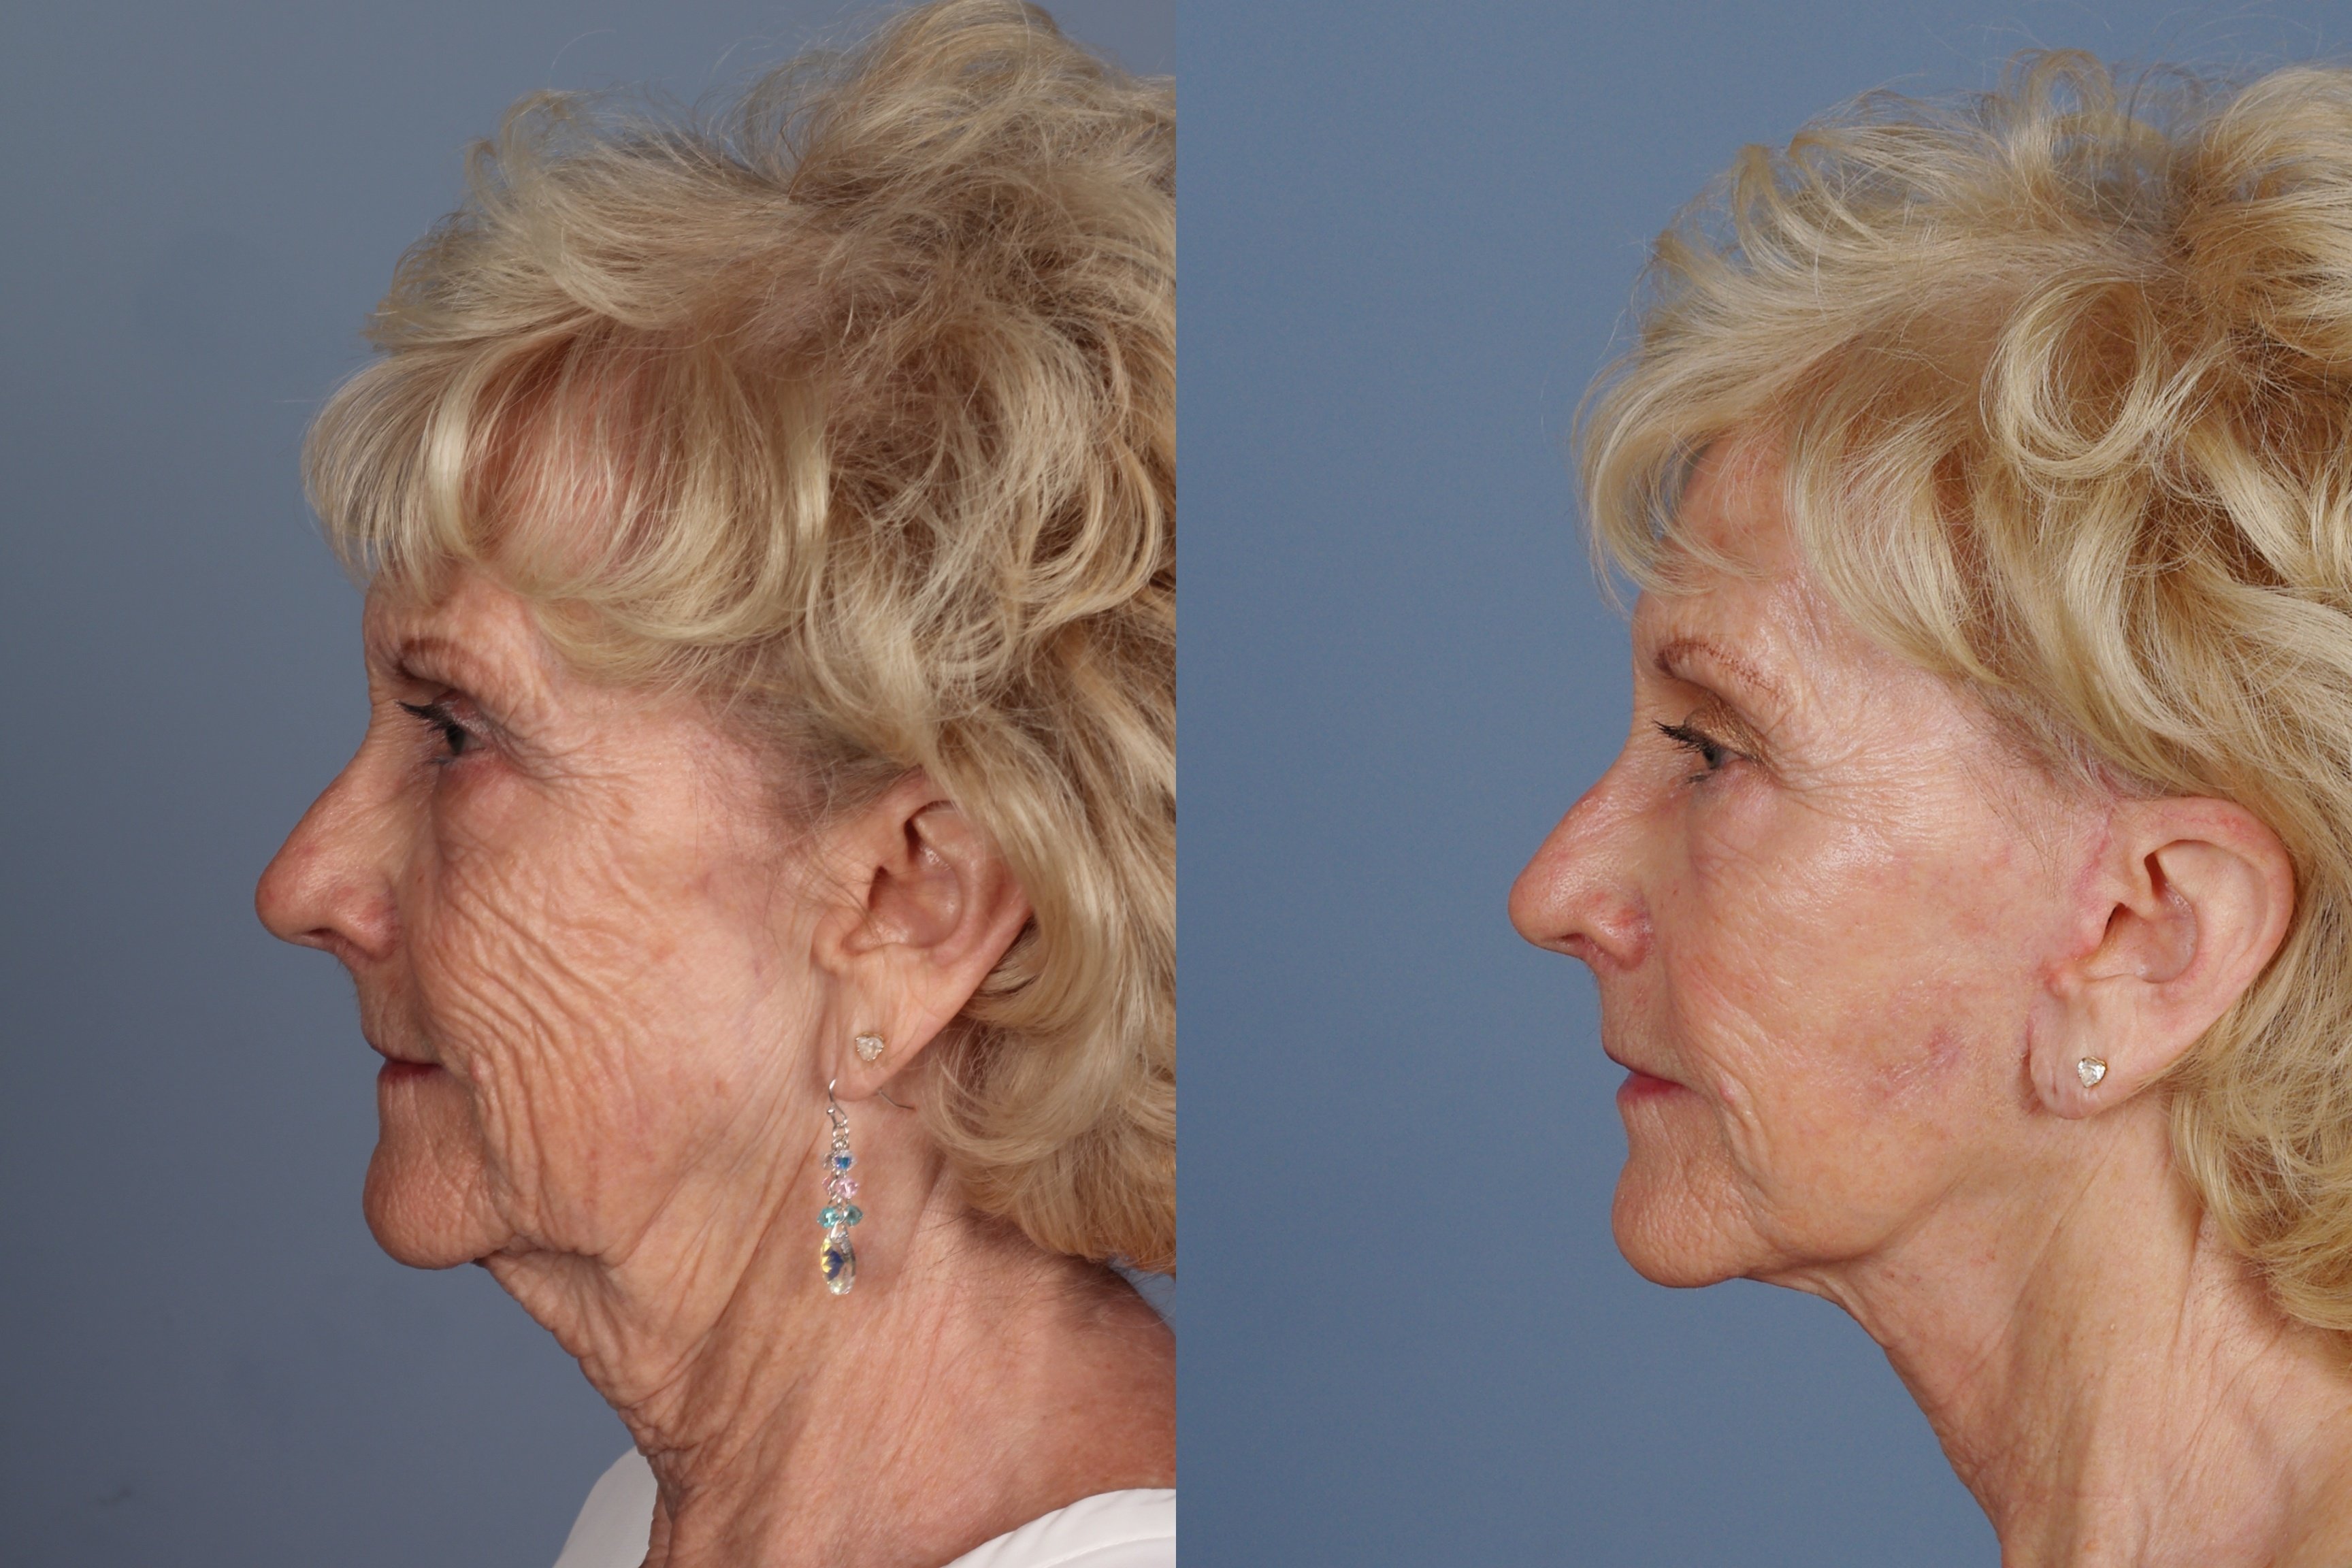 Possible Risks of Facelift Surgery